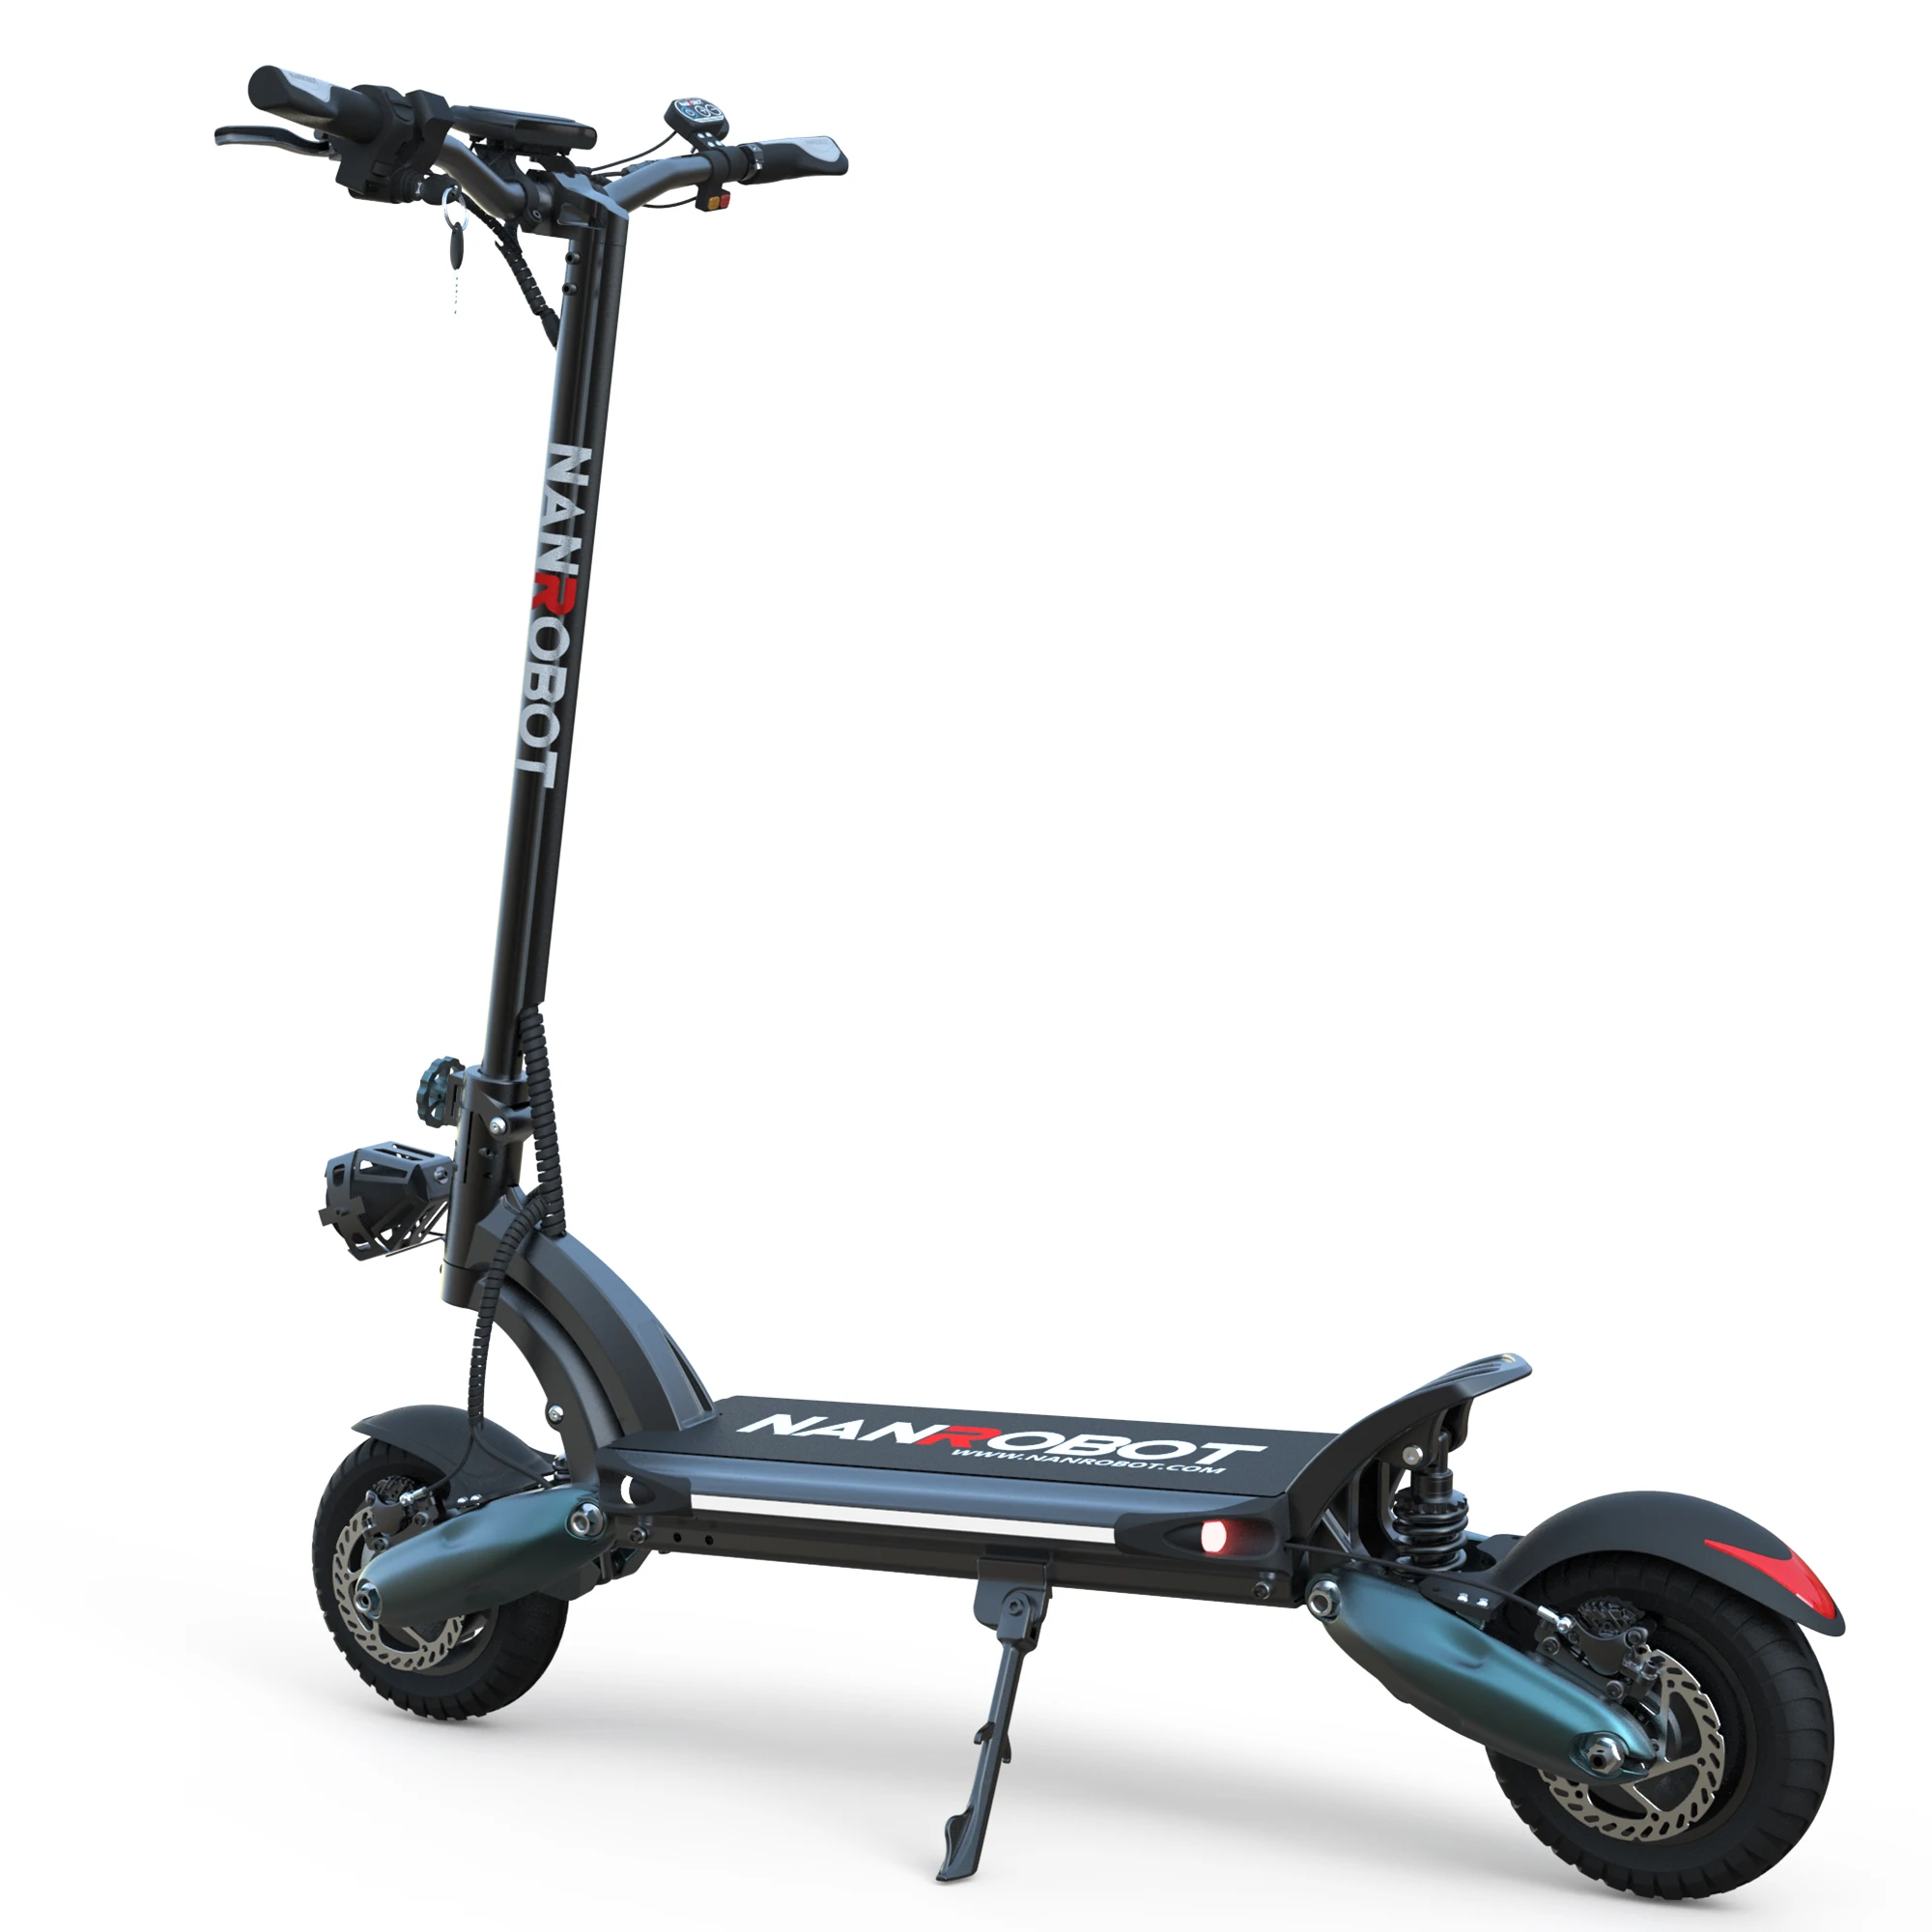 Nanrobot electric scooter D6+ adult scooter Off-road Tyre fastest Dual Motors 2000W Disc Brake for adultscustom duotts f26 electric mountain bike 750w 2 dual motors 48v 17 5ah lg battery 26 4 0 inch fat tires 55km h max speed 55 degree climbing smart color display dual disc brakes front shock absorption 150kg max load 100km range silver